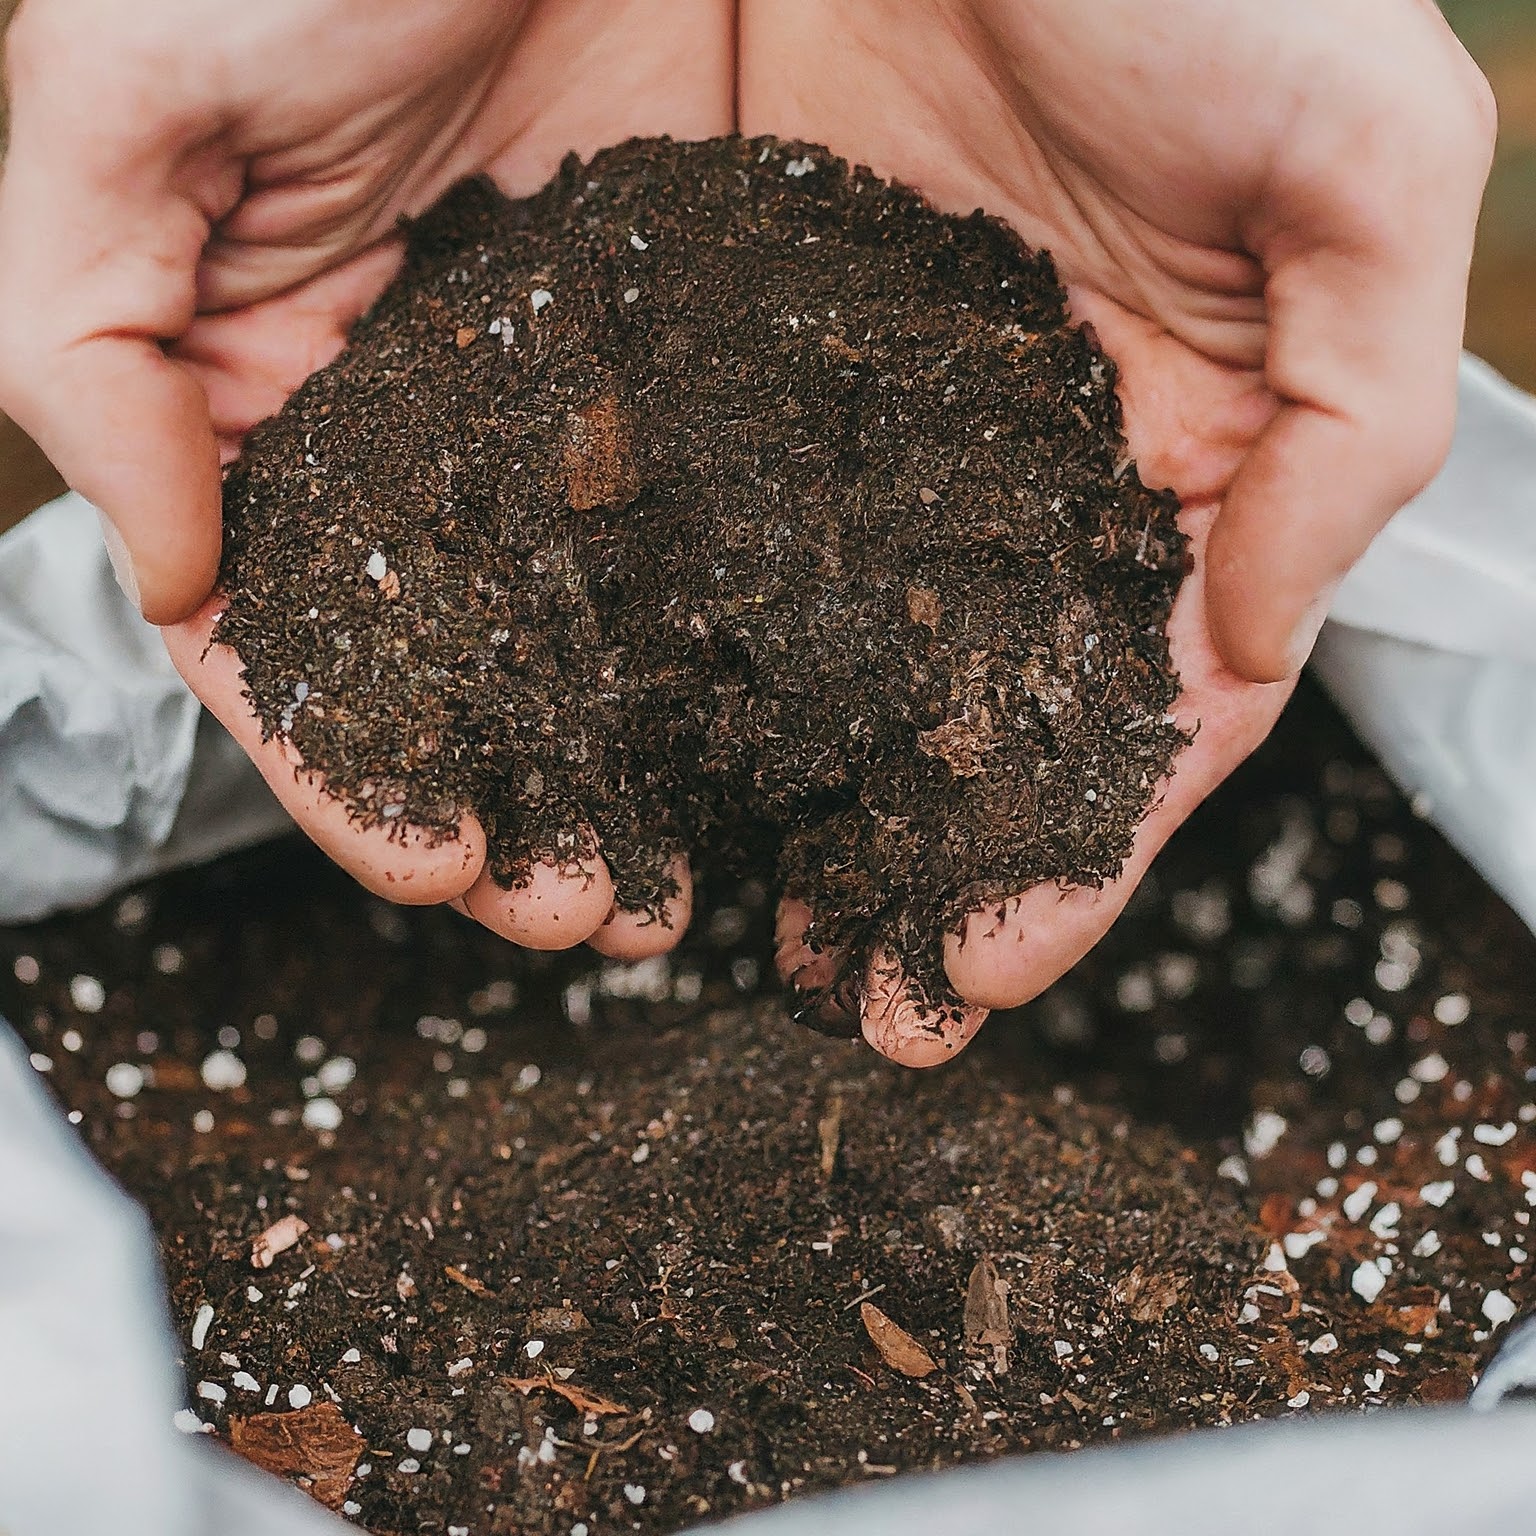 Potting Mix 101: Everything You Want to Know